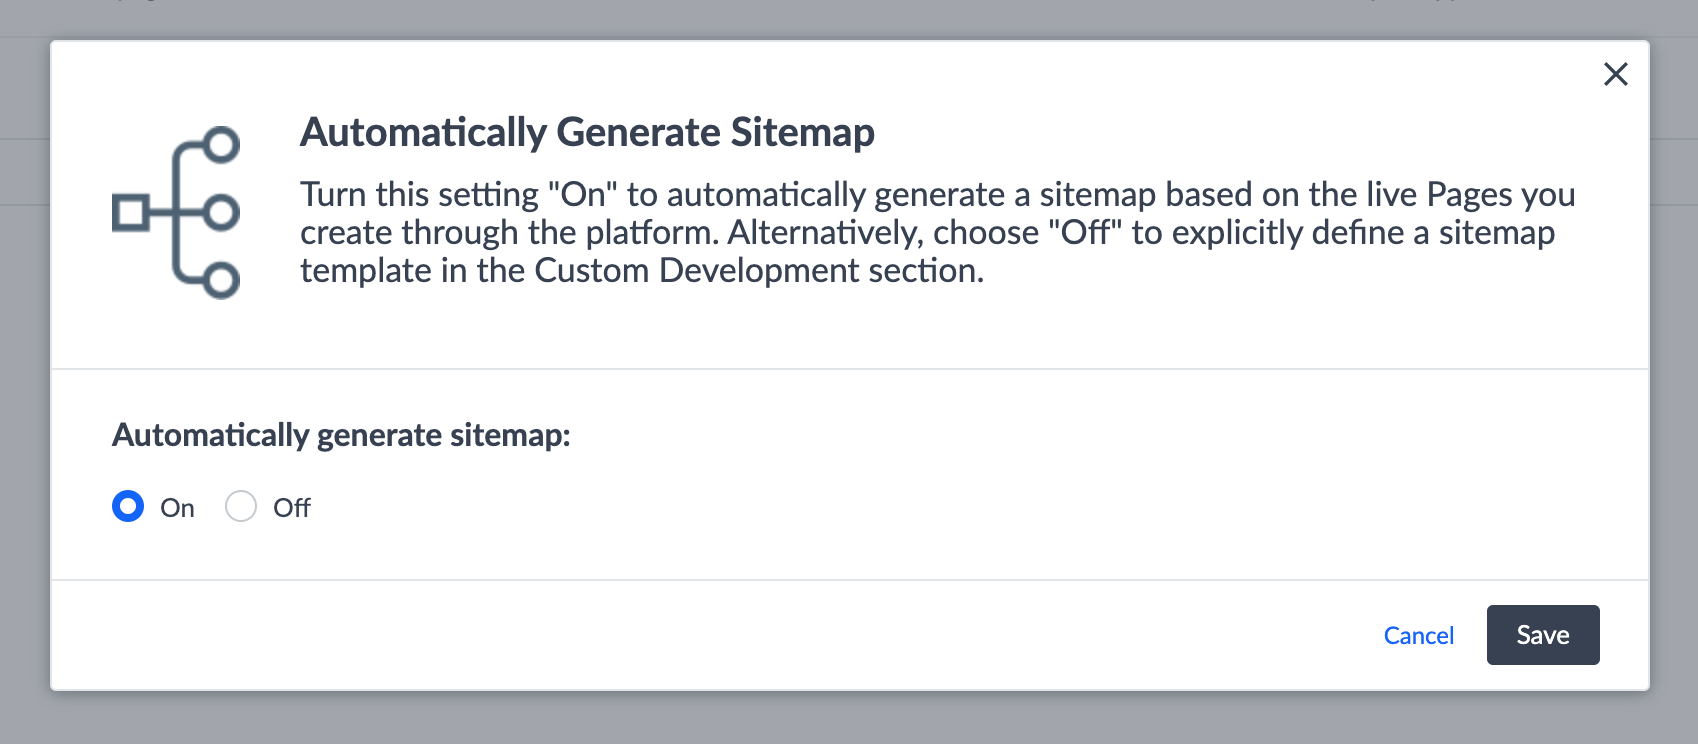 Automatically generate sitemap